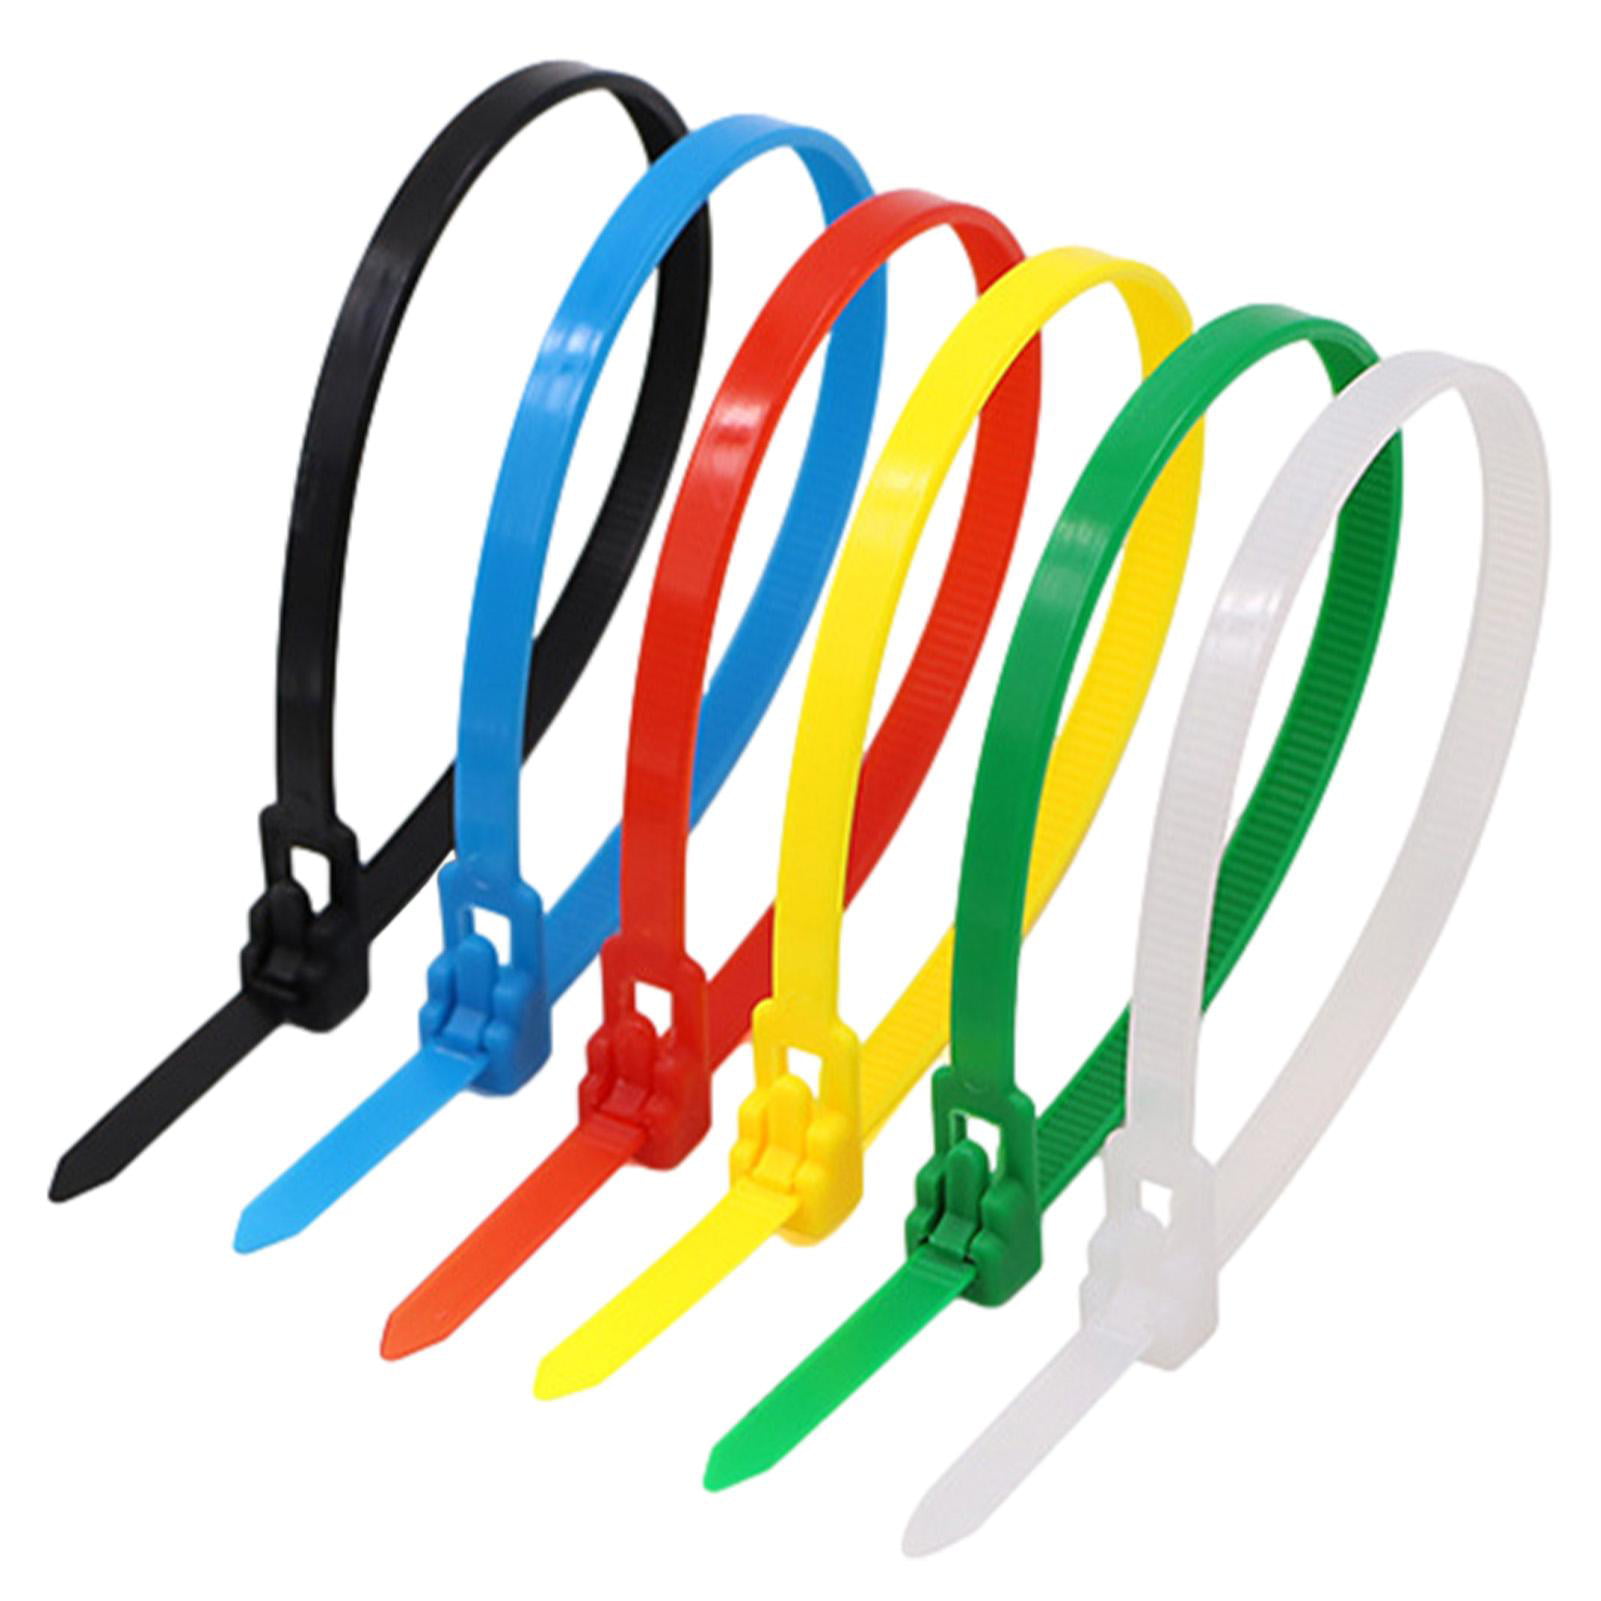 100Pcs Releasable Reusable Cable Ties Nylon Zip Tie Wraps Strong Cord Winder